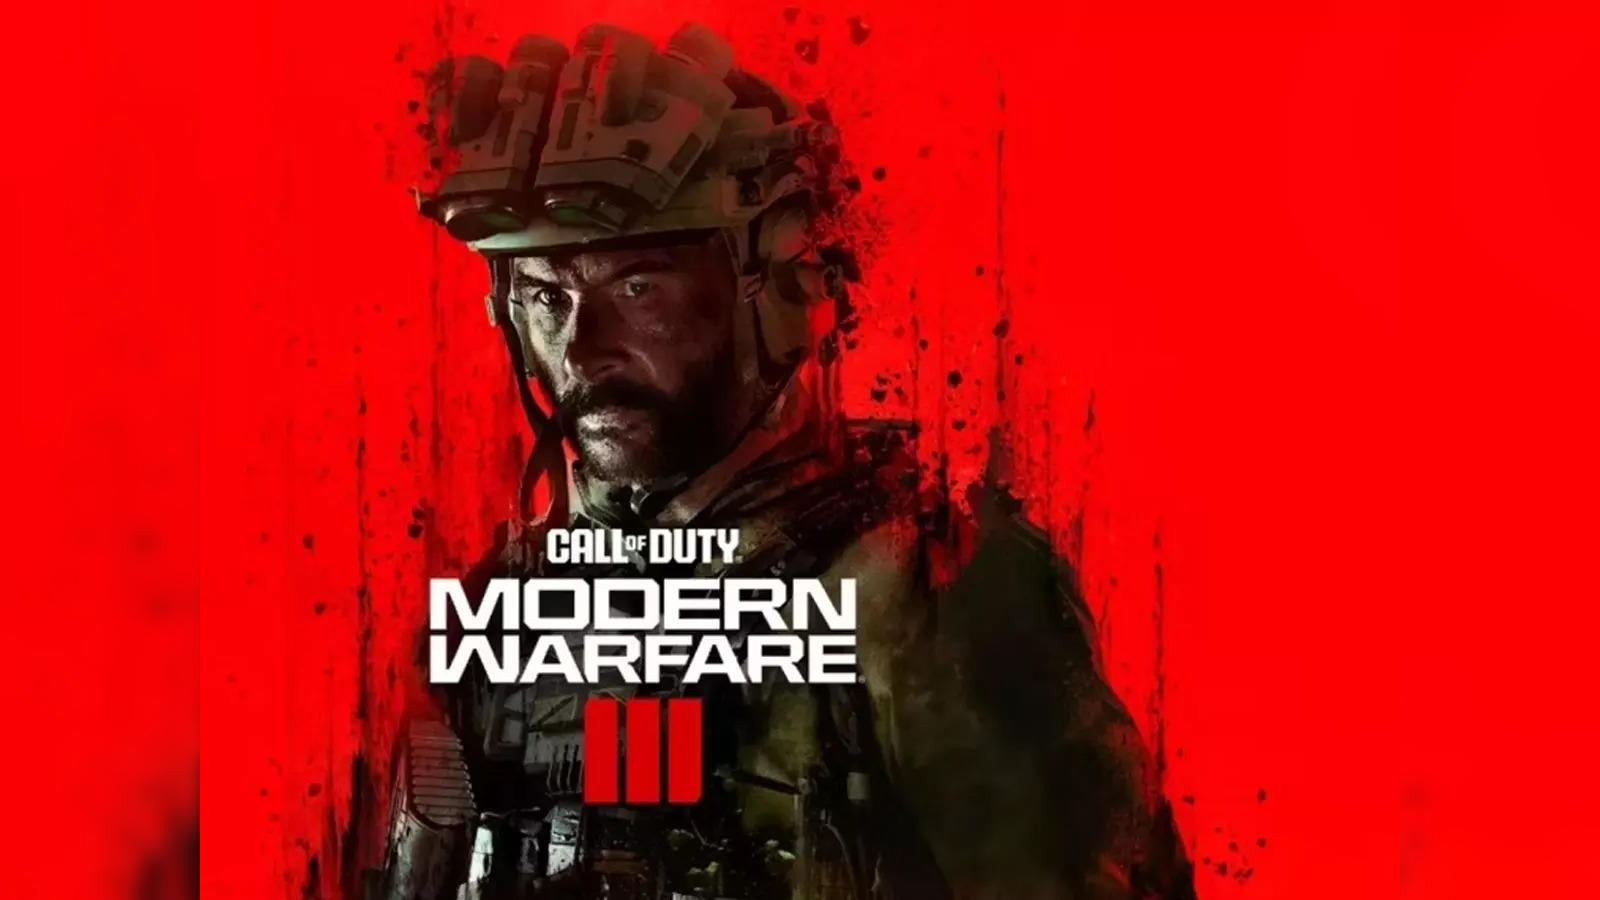 Call of Duty Modern Warfare 3 gameplay trailer sends players to prison